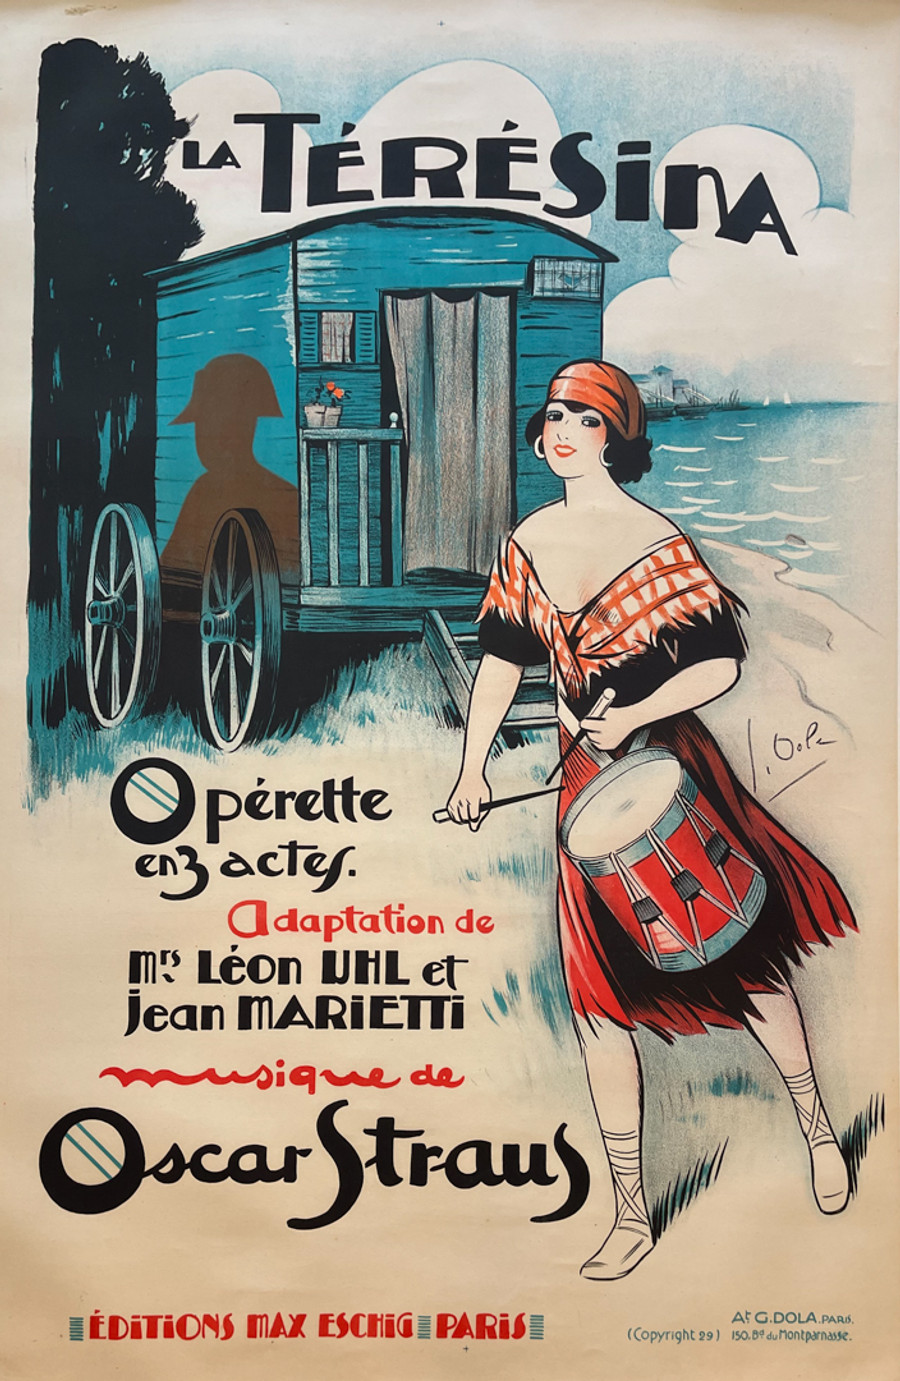 La Teresina by Georges Dola, original French lithograph poster printed circa 1929. Advertises for an operette.  A- condition. Mounted on archival linen.